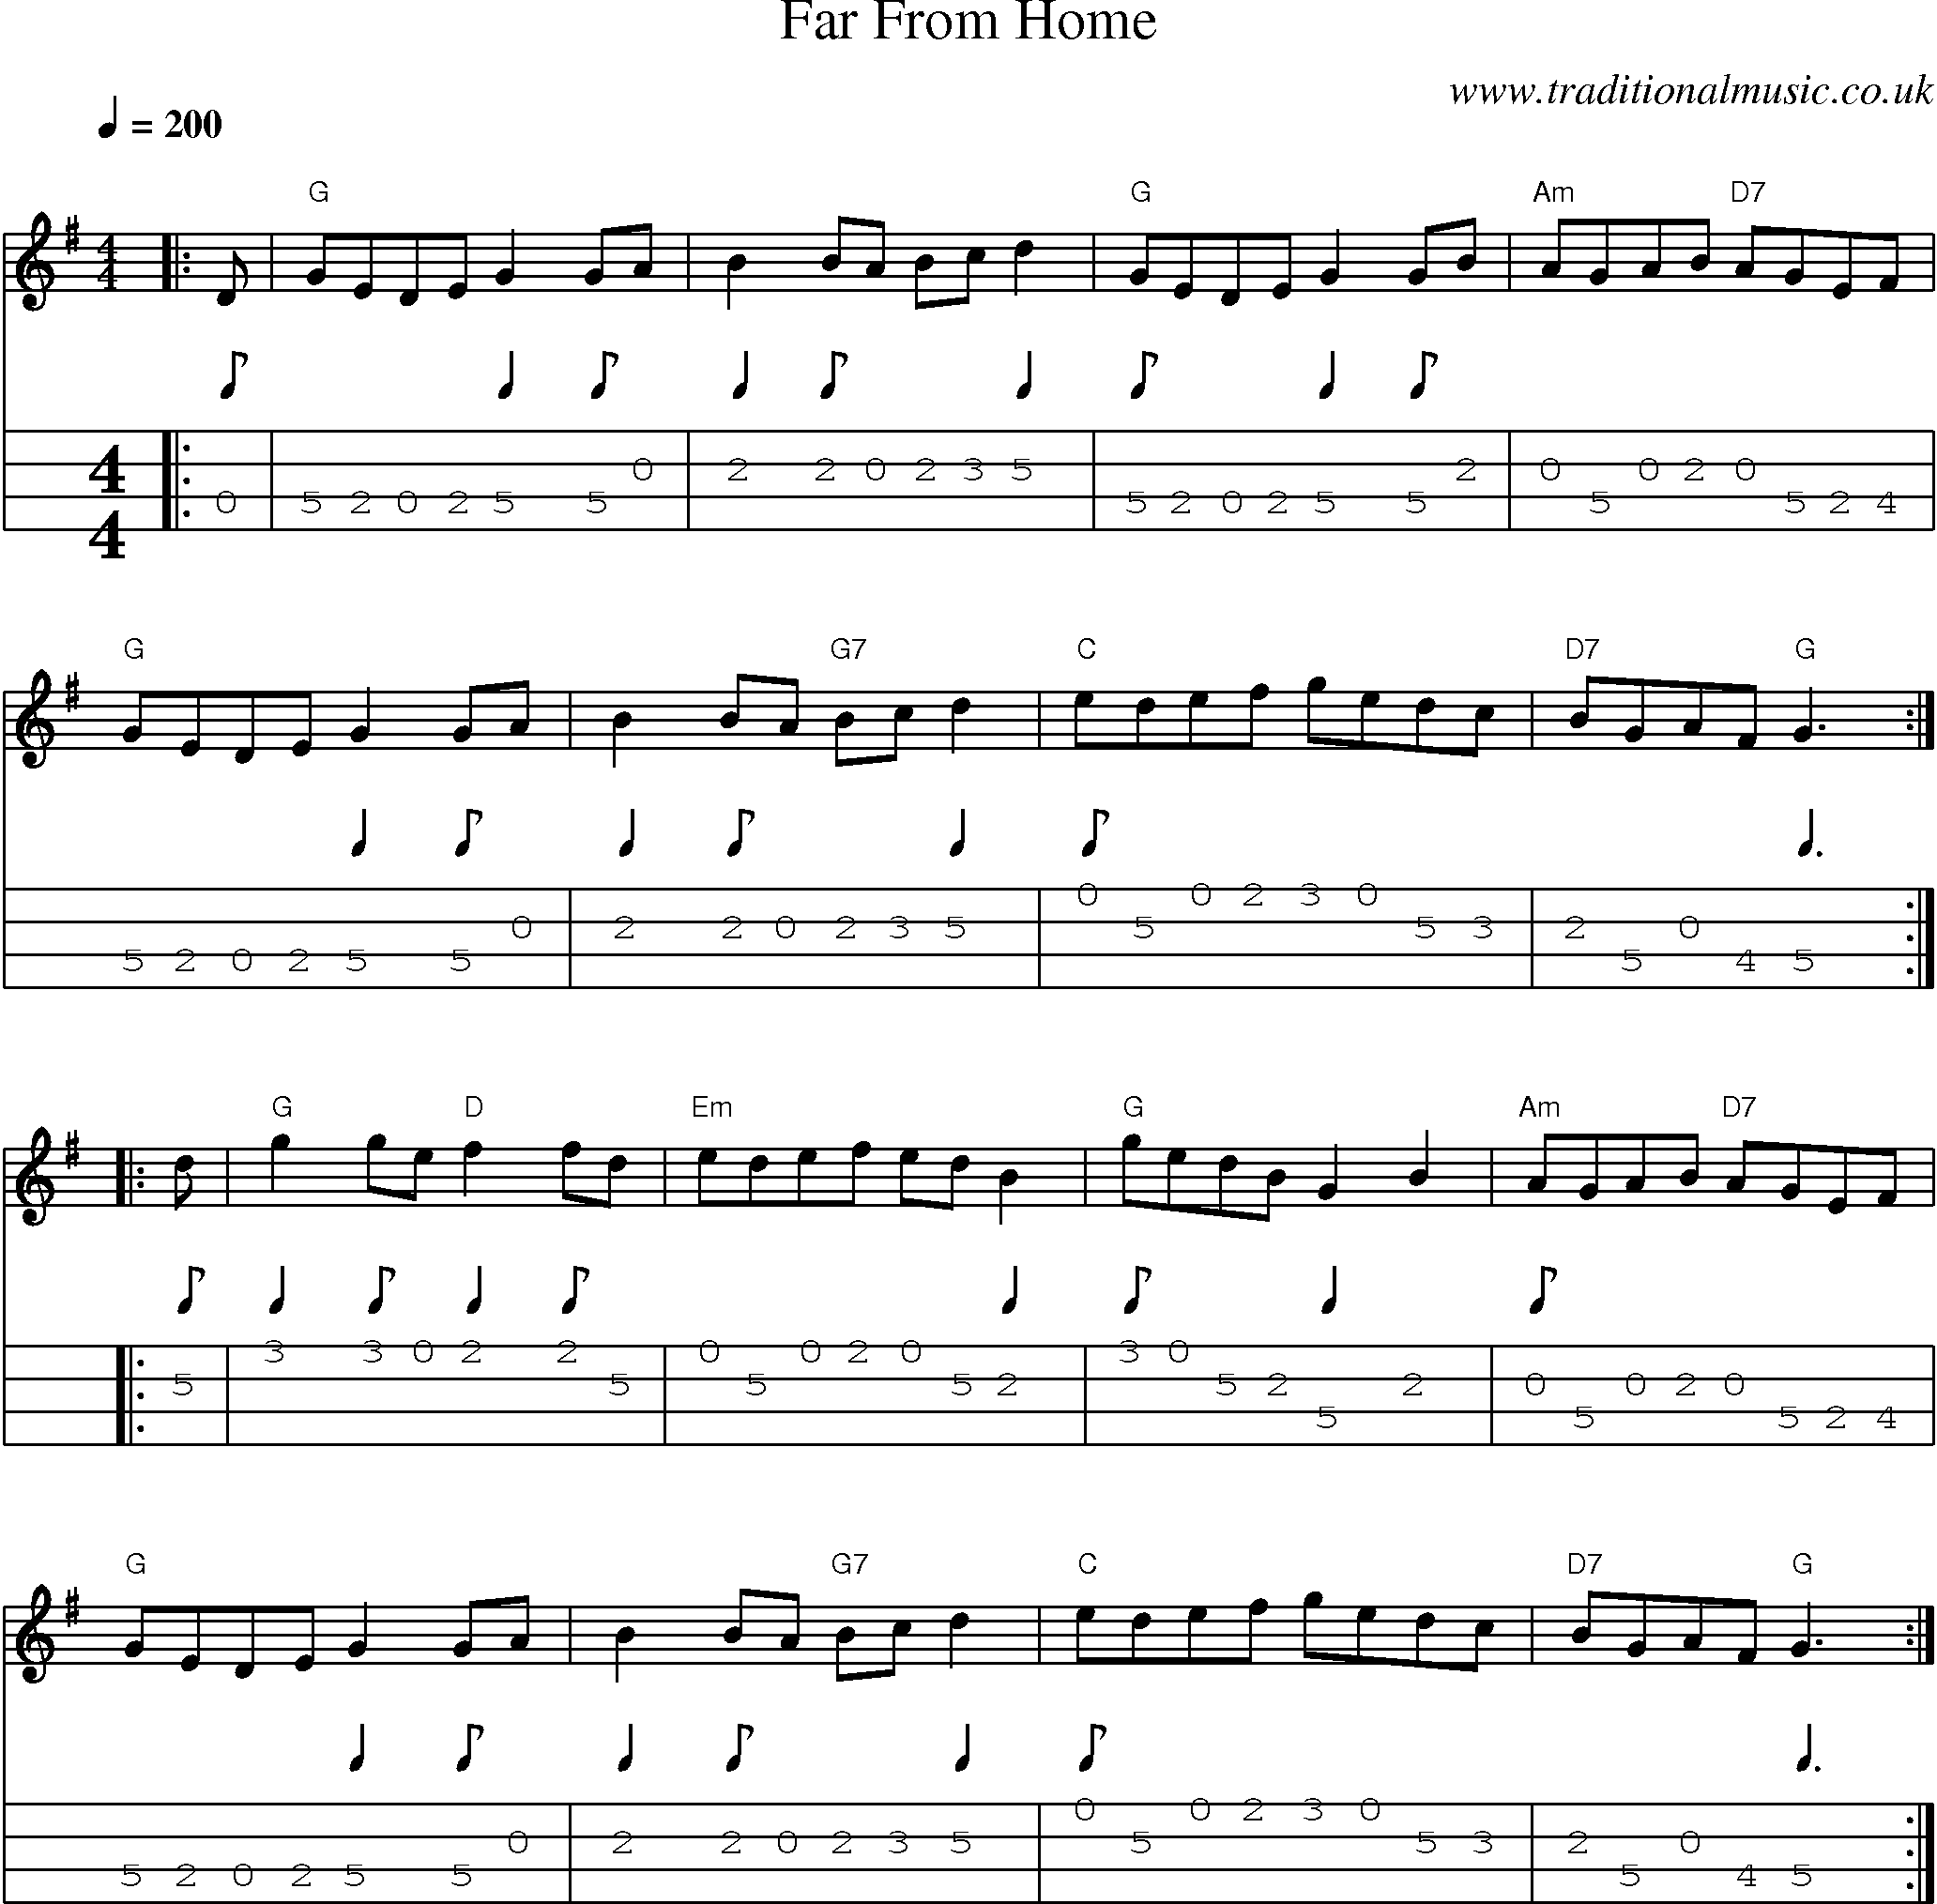 Music Score and Mandolin Tabs for Far From Home